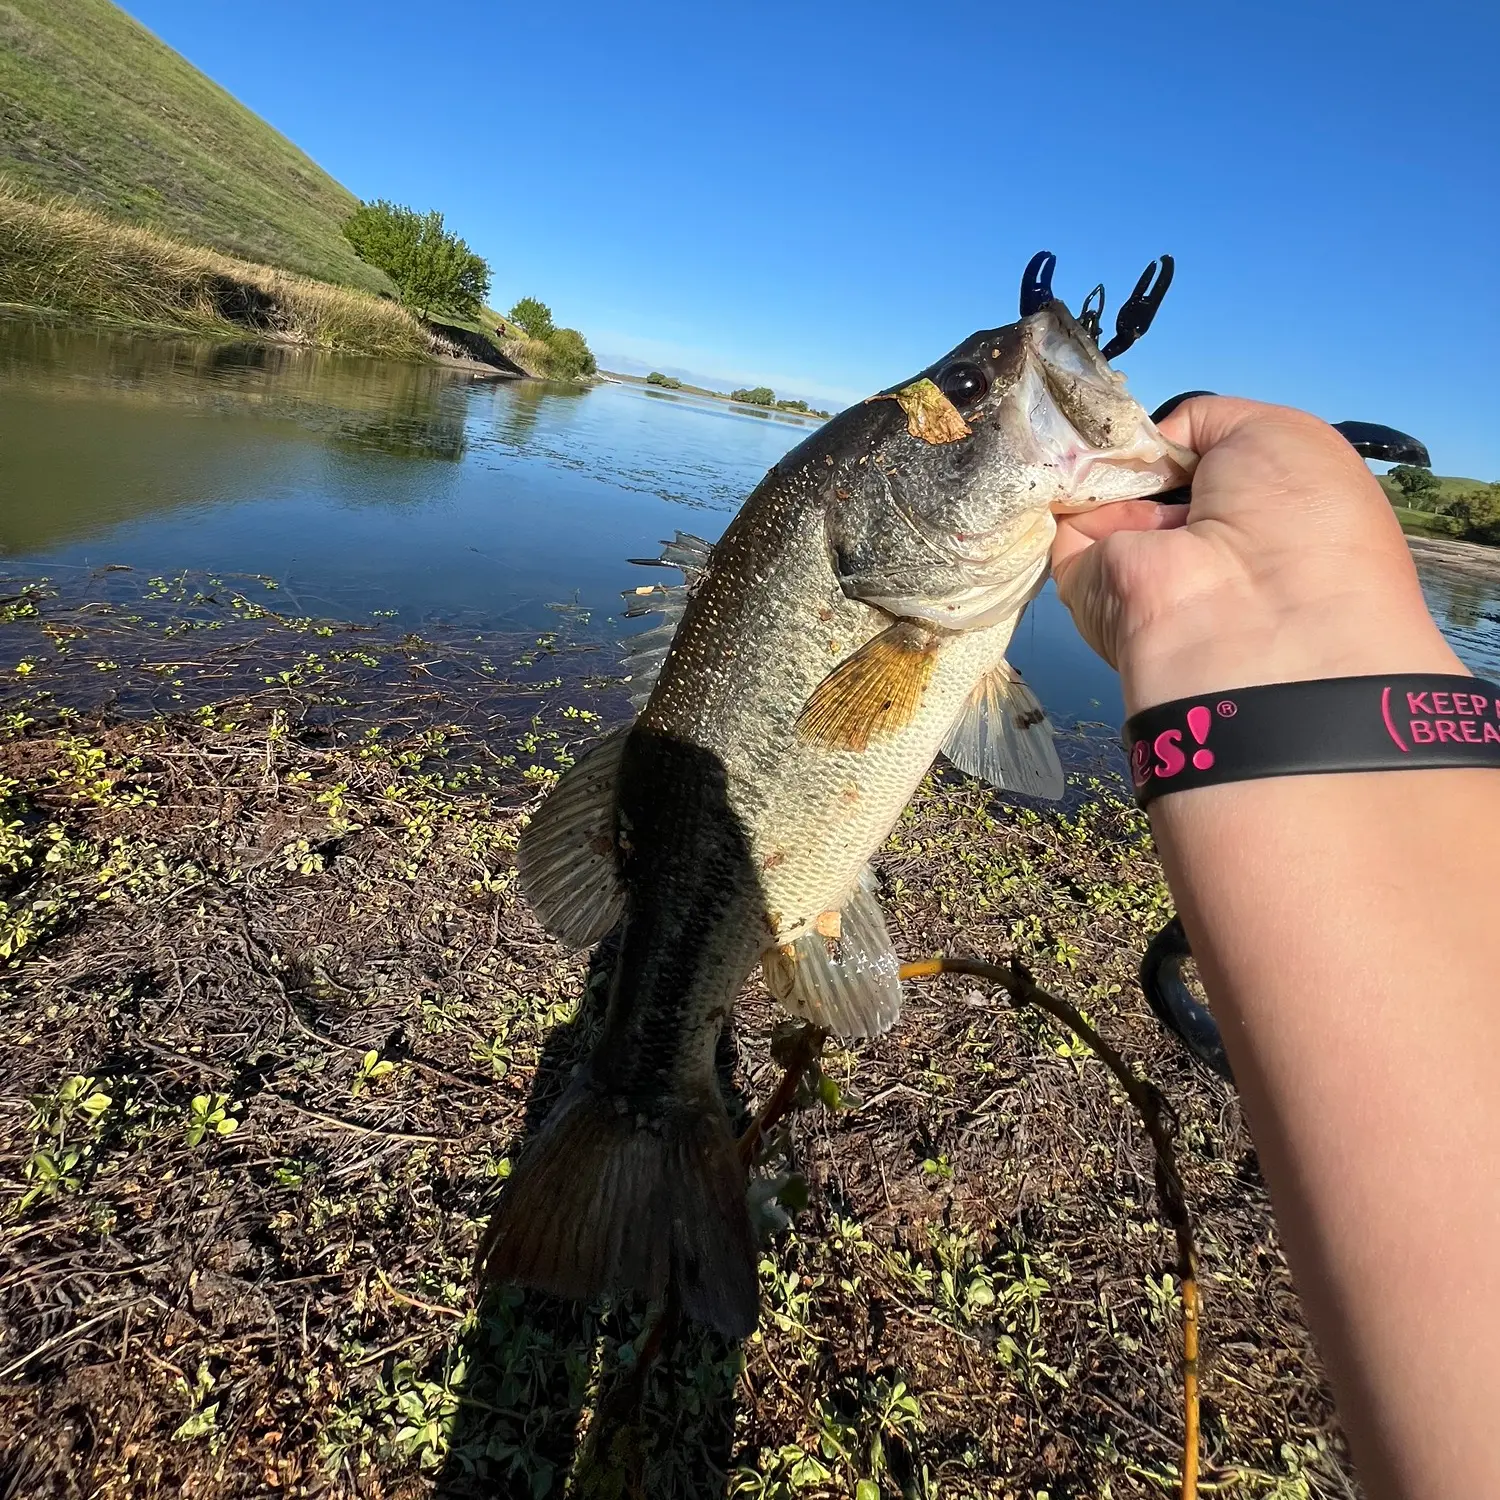 Ultra Light Micro Spoon Suburban Trout Fishing at Contra Loma